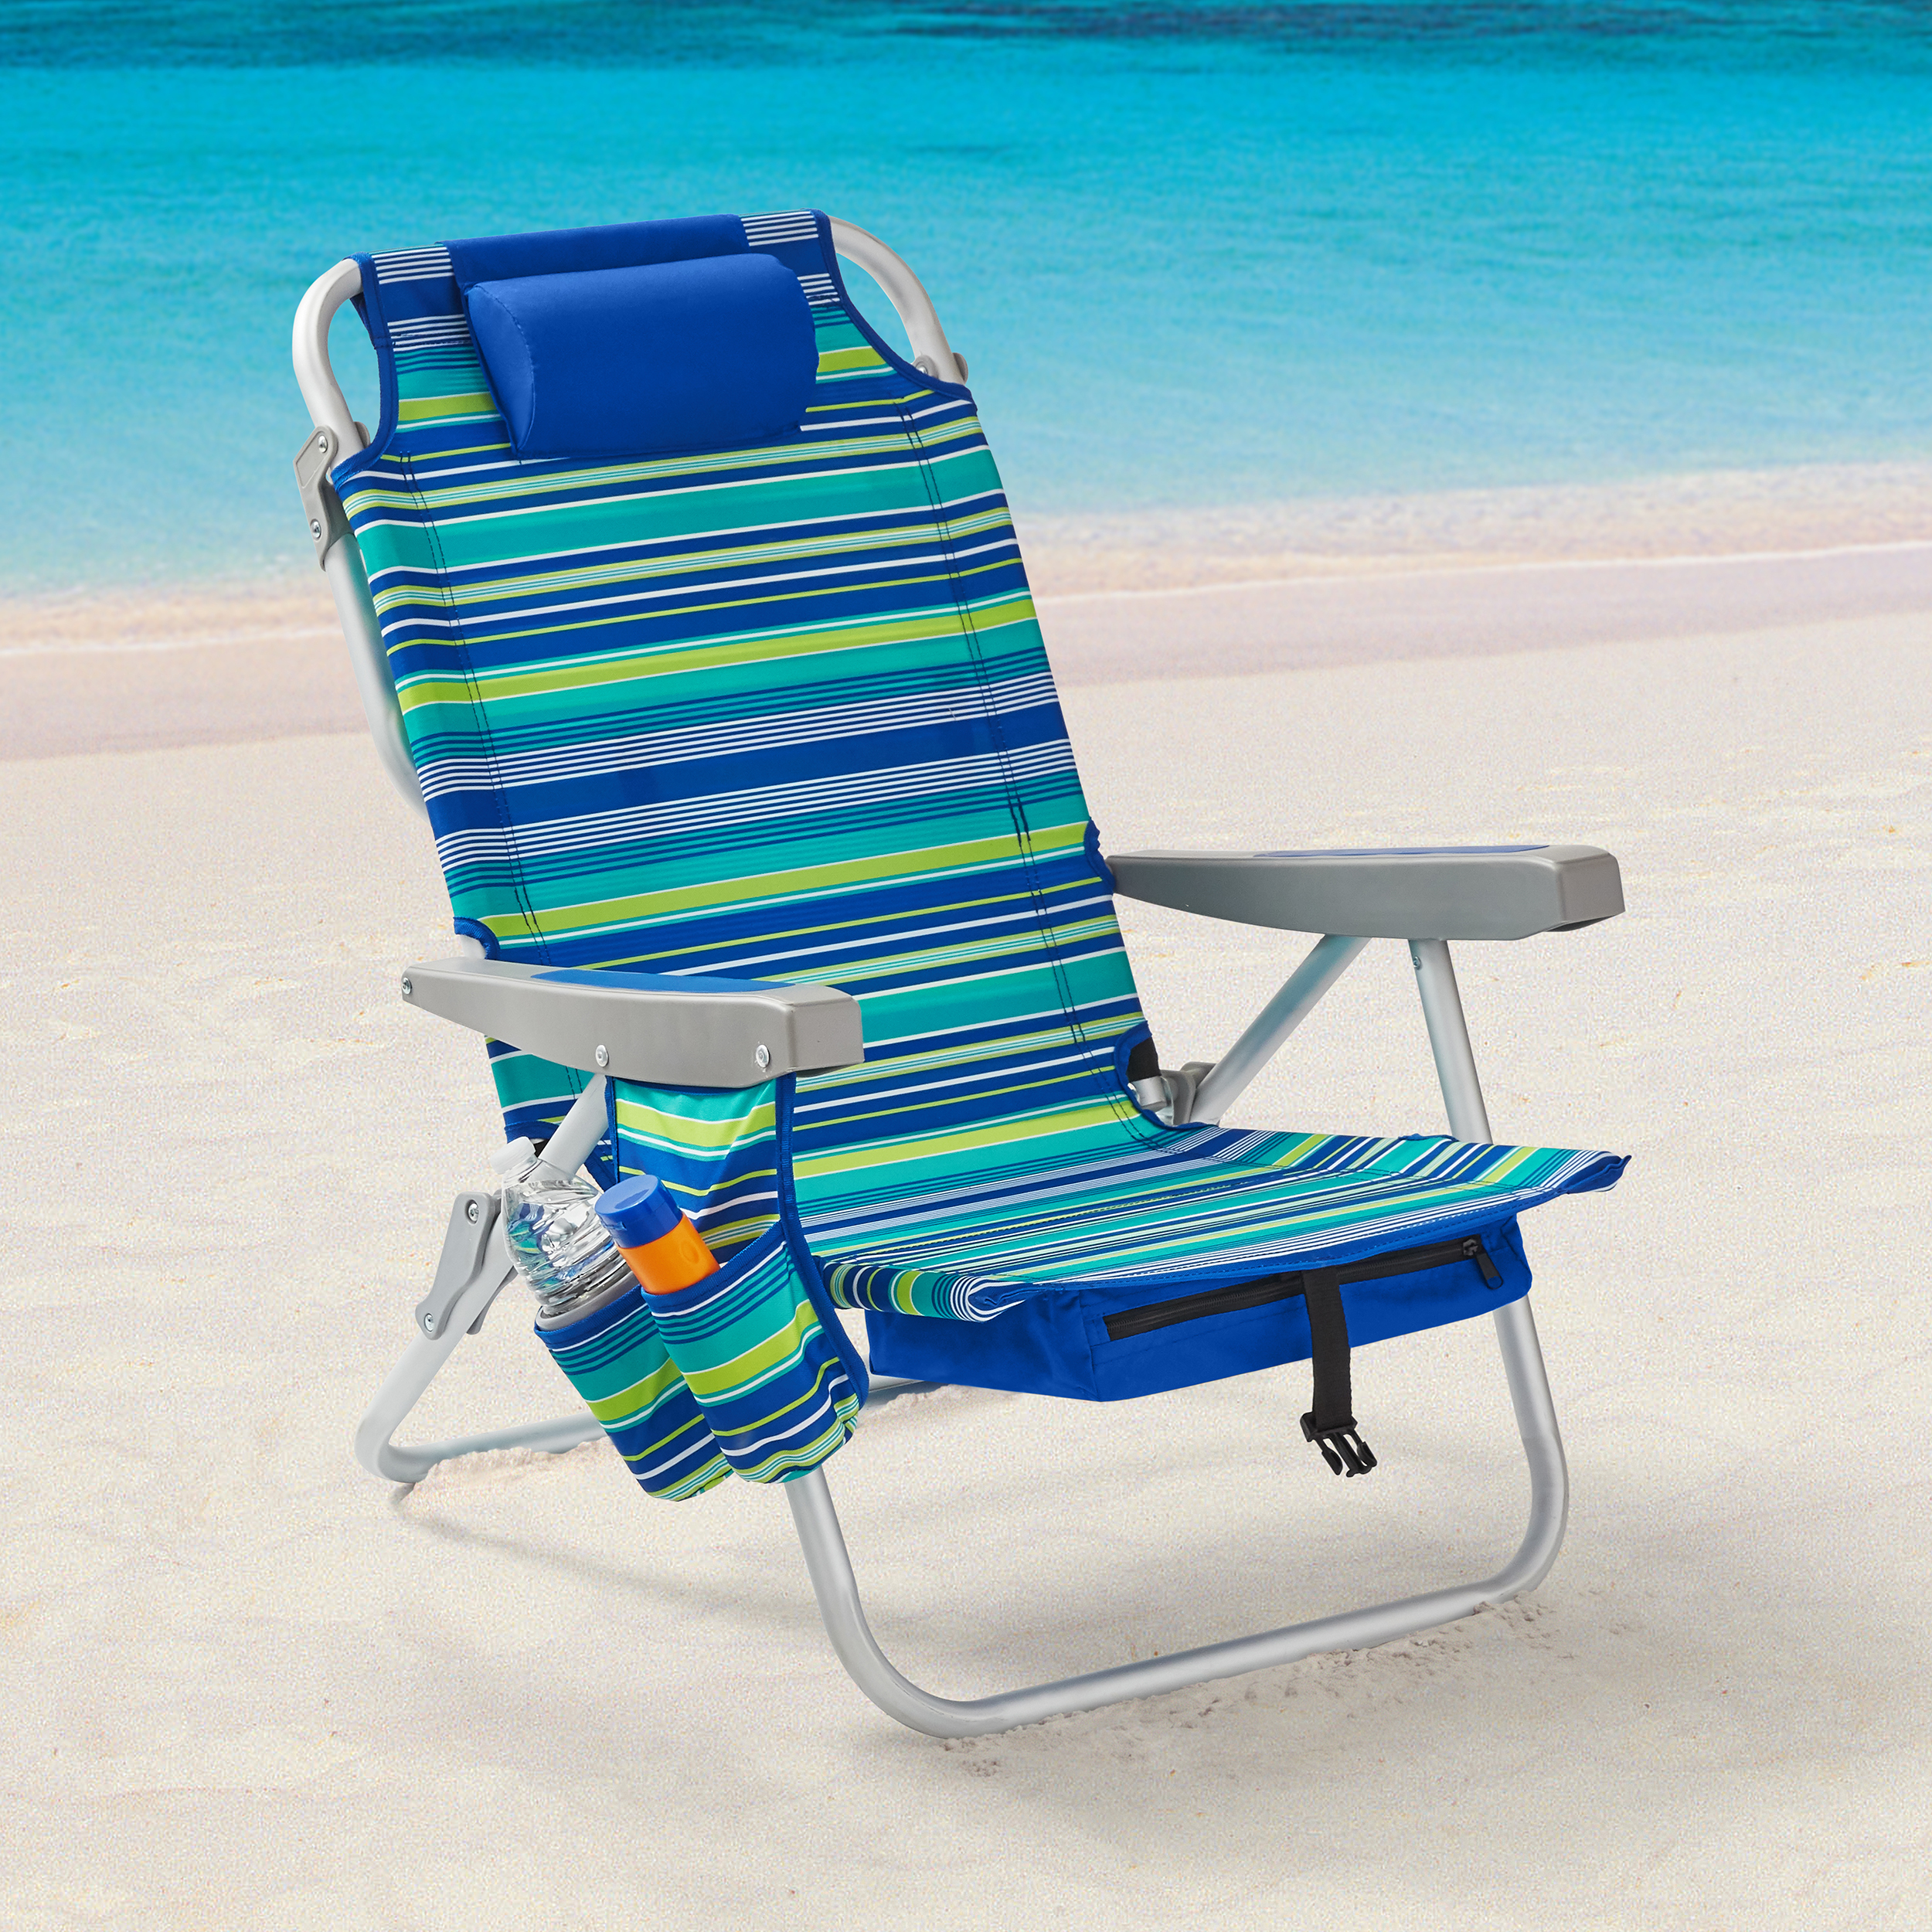 Mainstays Backpack Aluminum Beach Chair, Multi-color - image 1 of 11